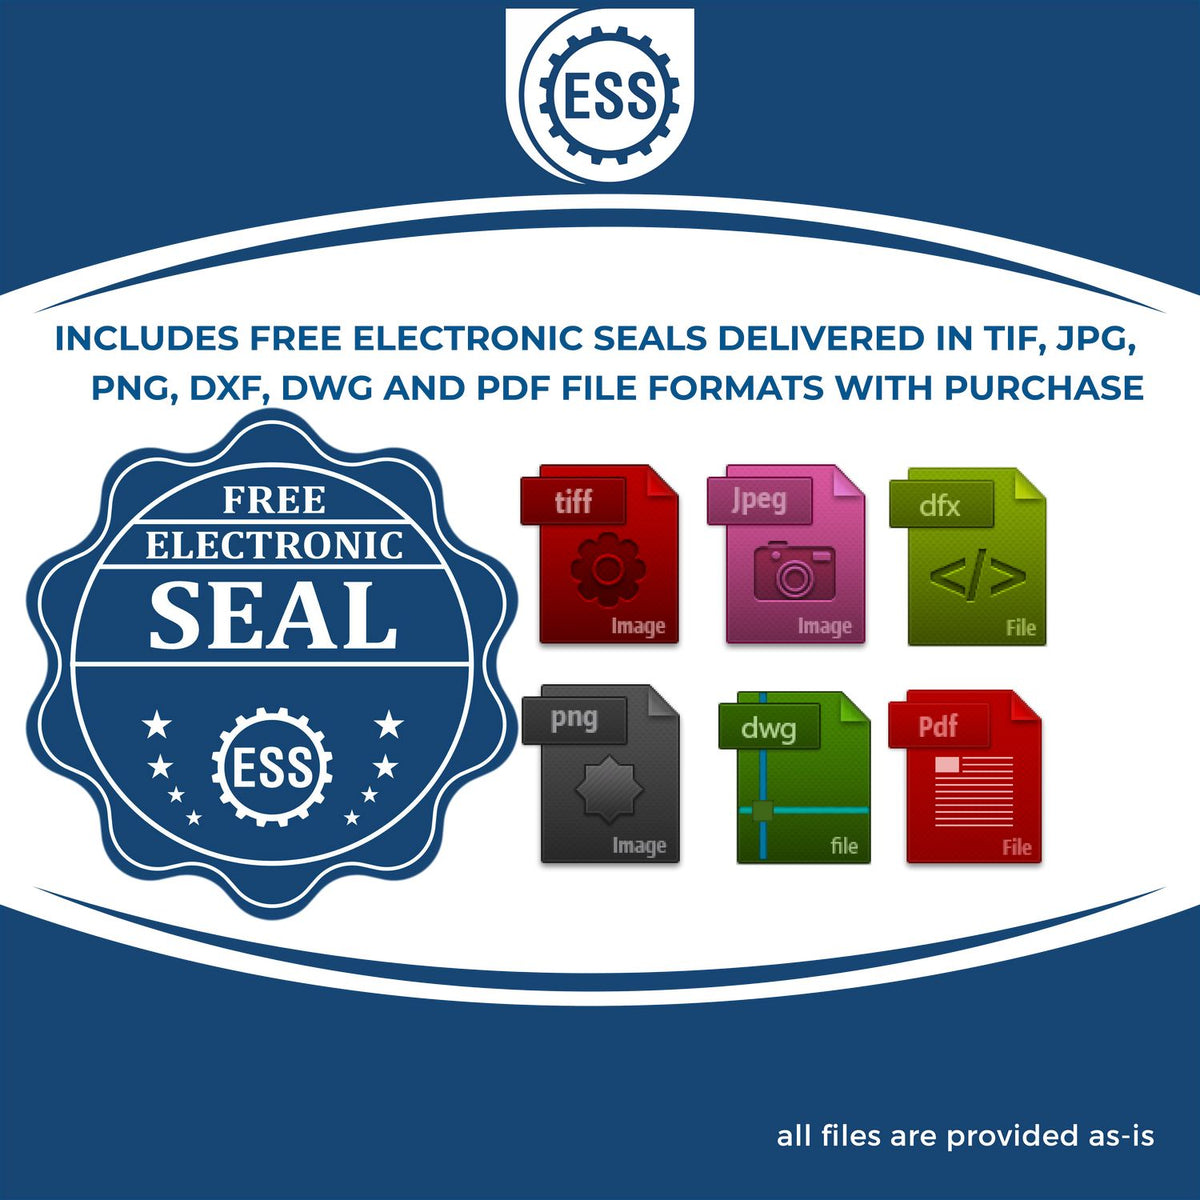 An infographic for the free electronic seal for the State of Nebraska Extended Long Reach Geologist Seal illustrating the different file type icons such as DXF, DWG, TIF, JPG and PNG.